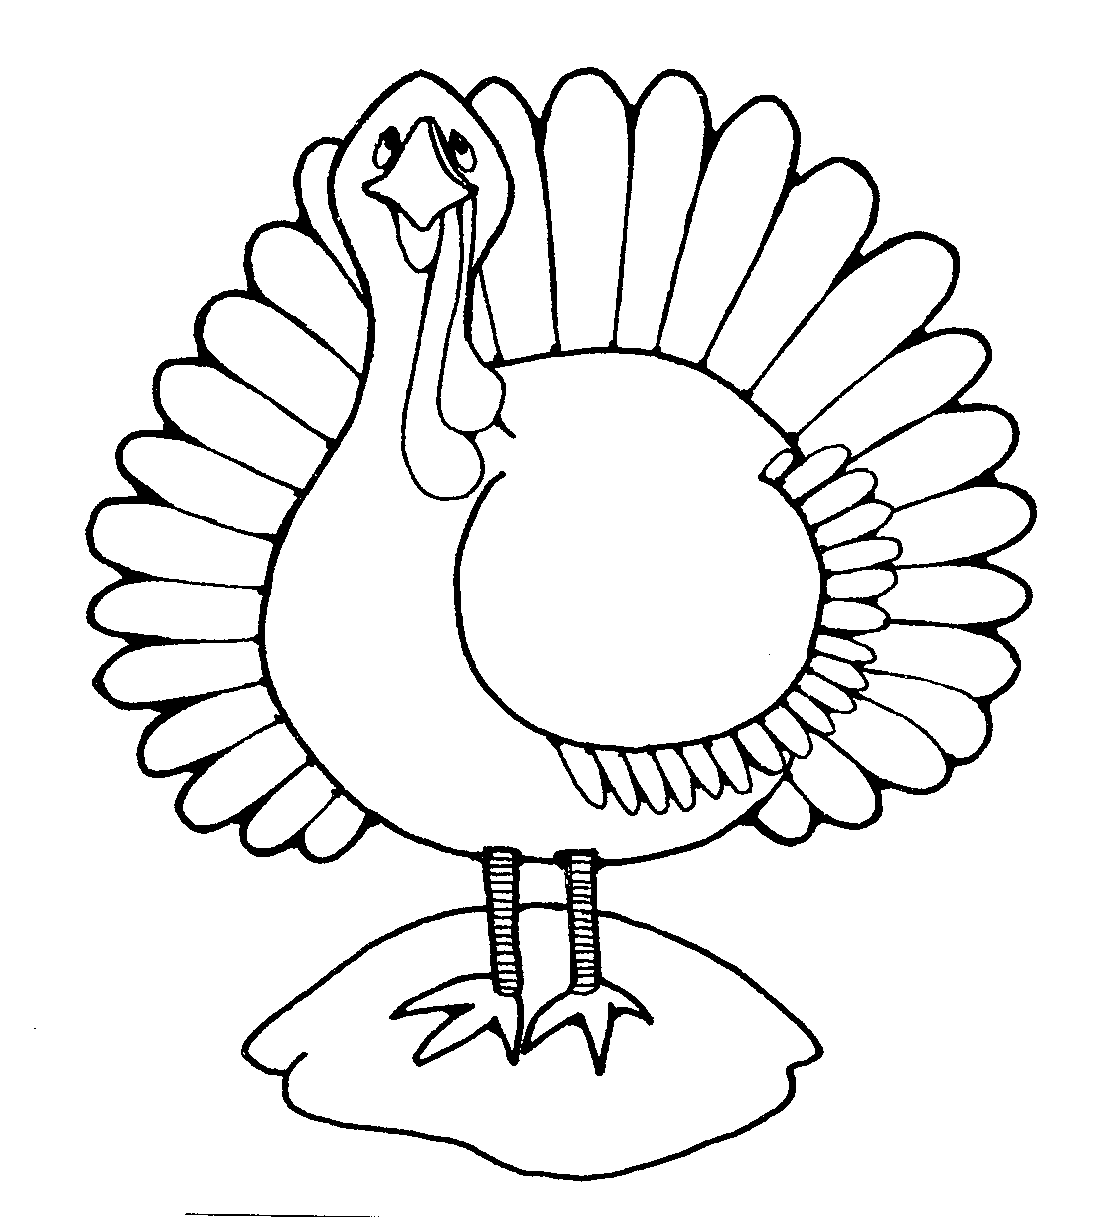 Turkey Line Drawing - Clipart library